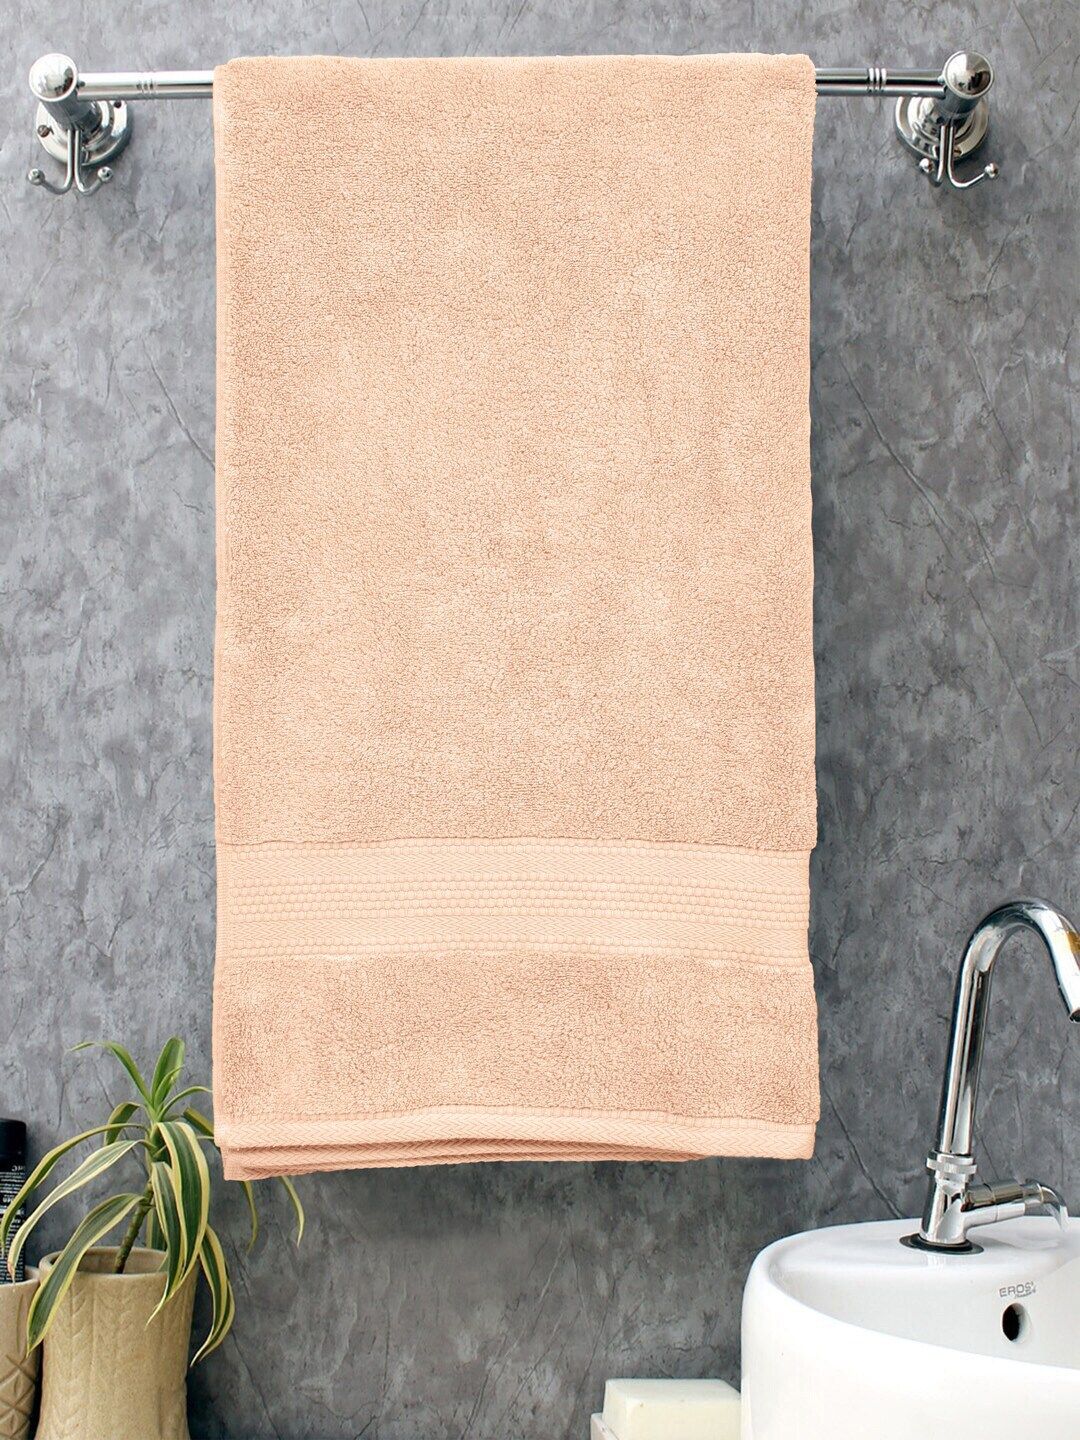 BOMBAY DYEING Biege 650 GSM Cotton Bath Towel Price in India